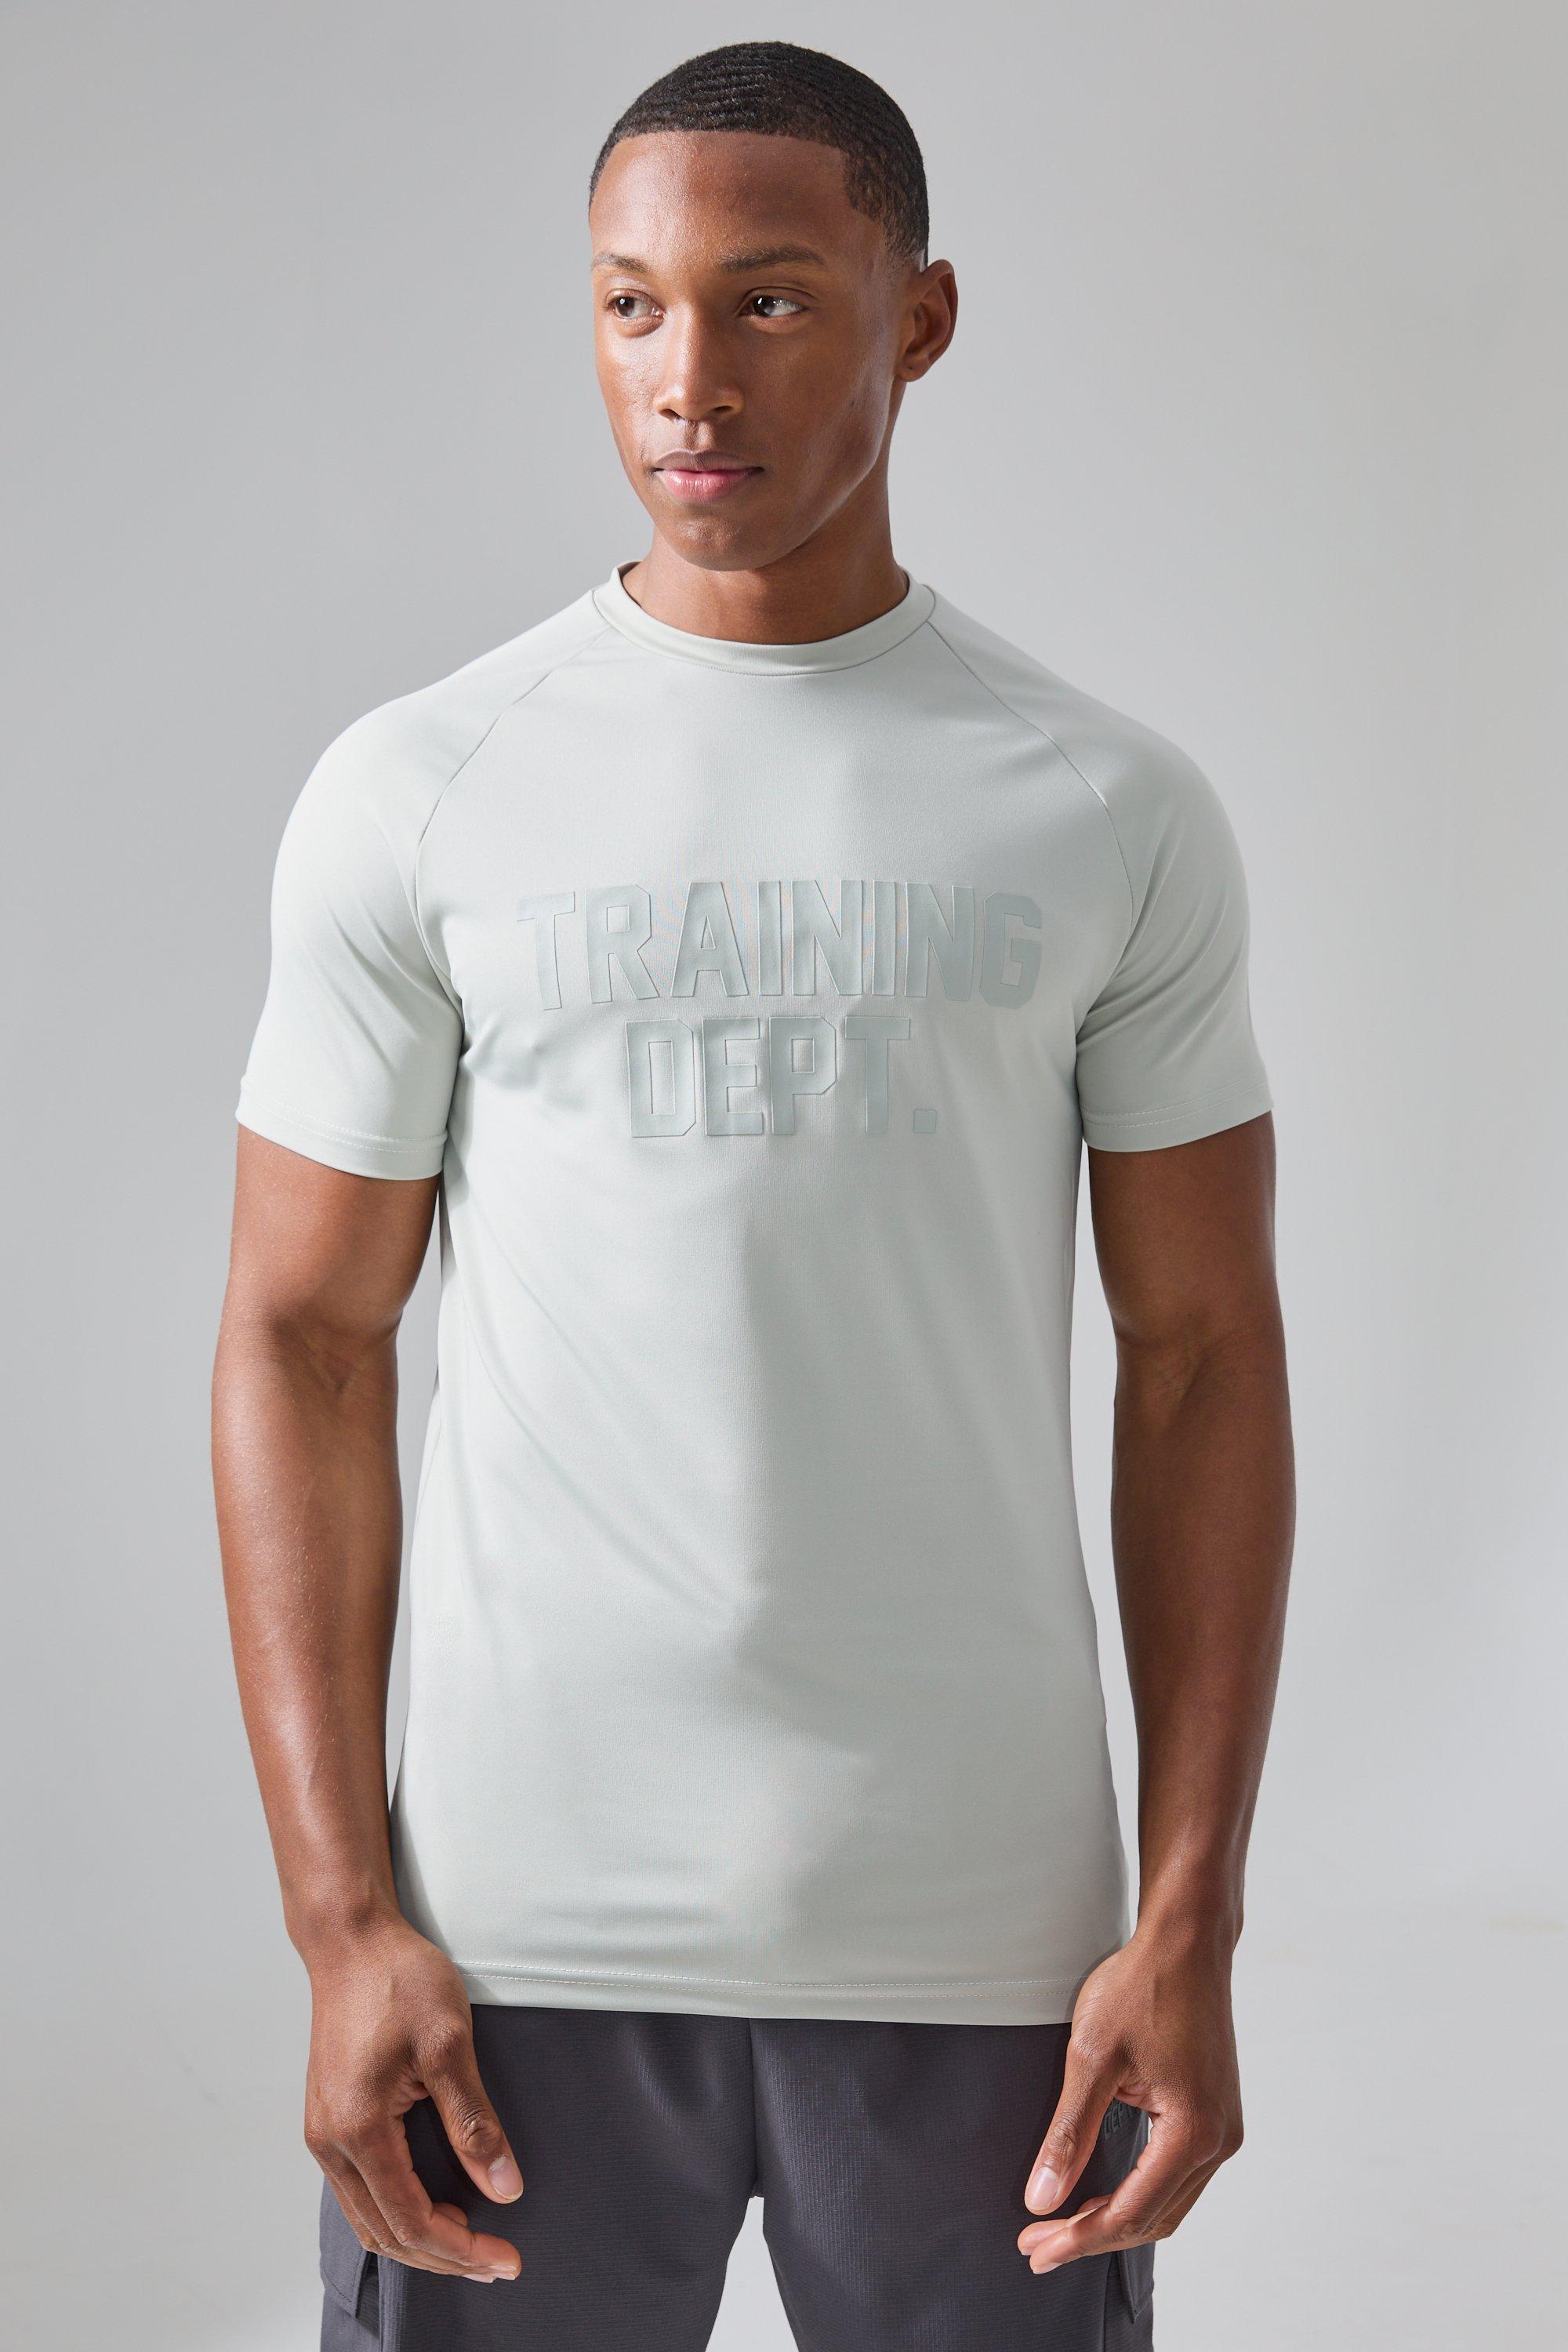 Image of Active Training Dept Muscle Fit T-shirt, Beige